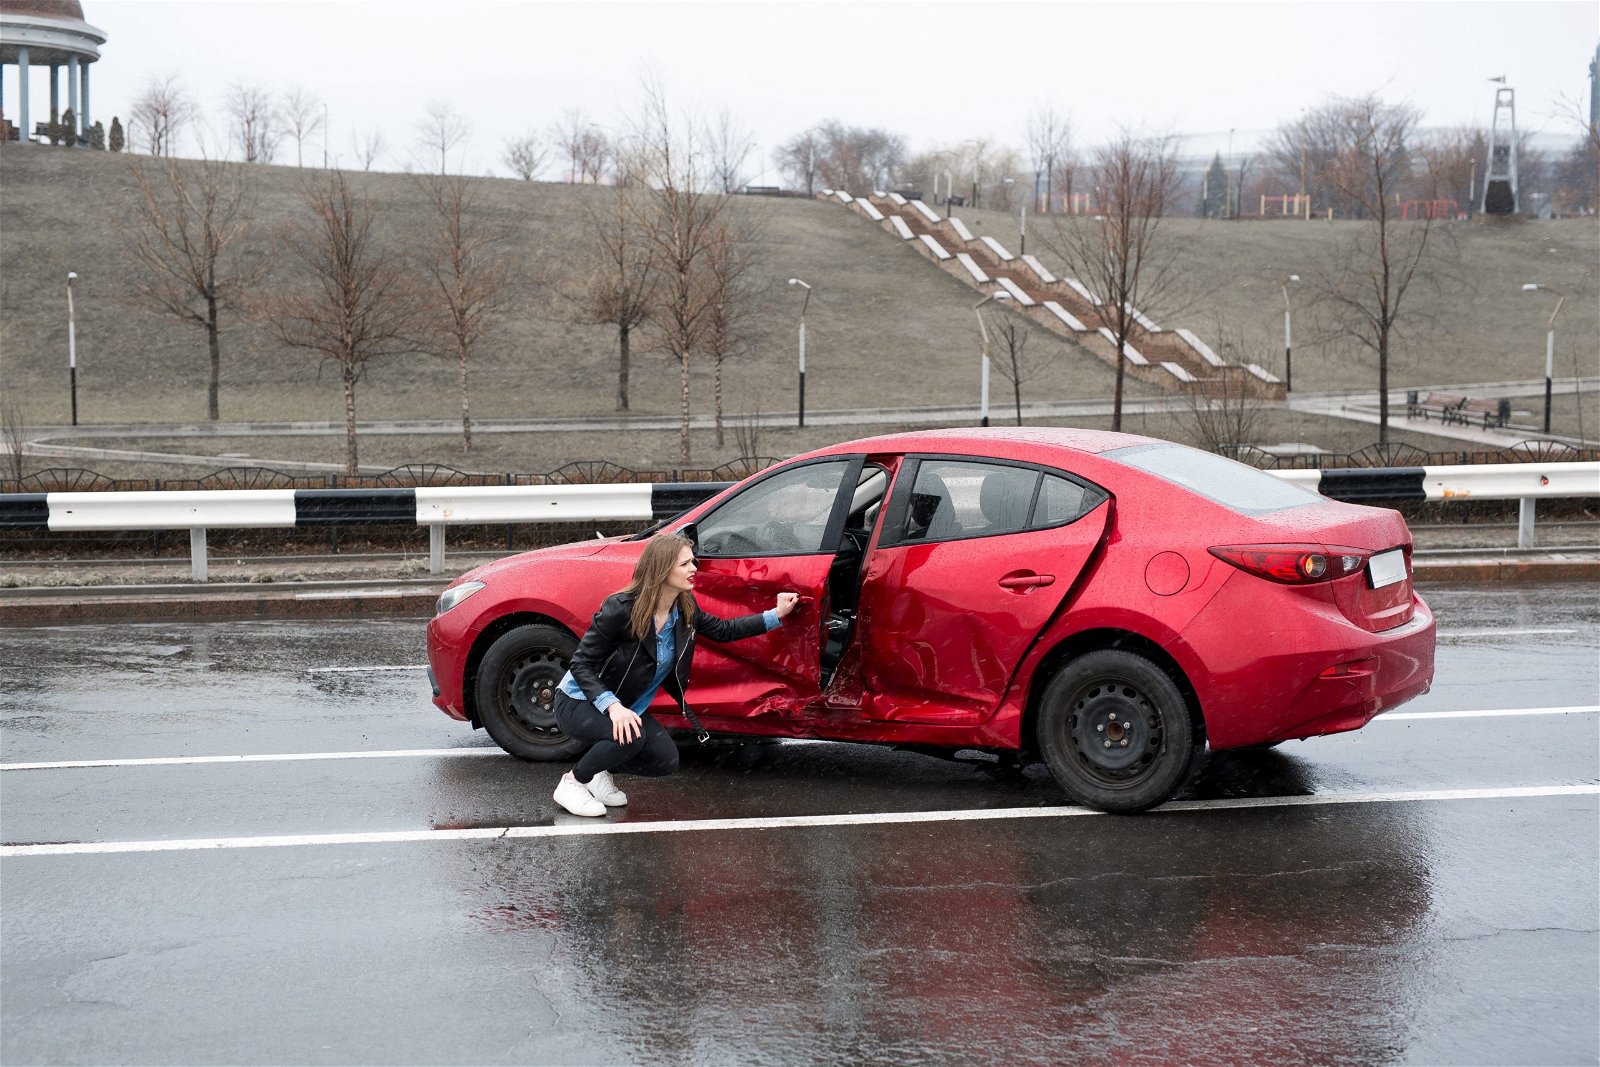 Hire an Attorney after a Car Accident